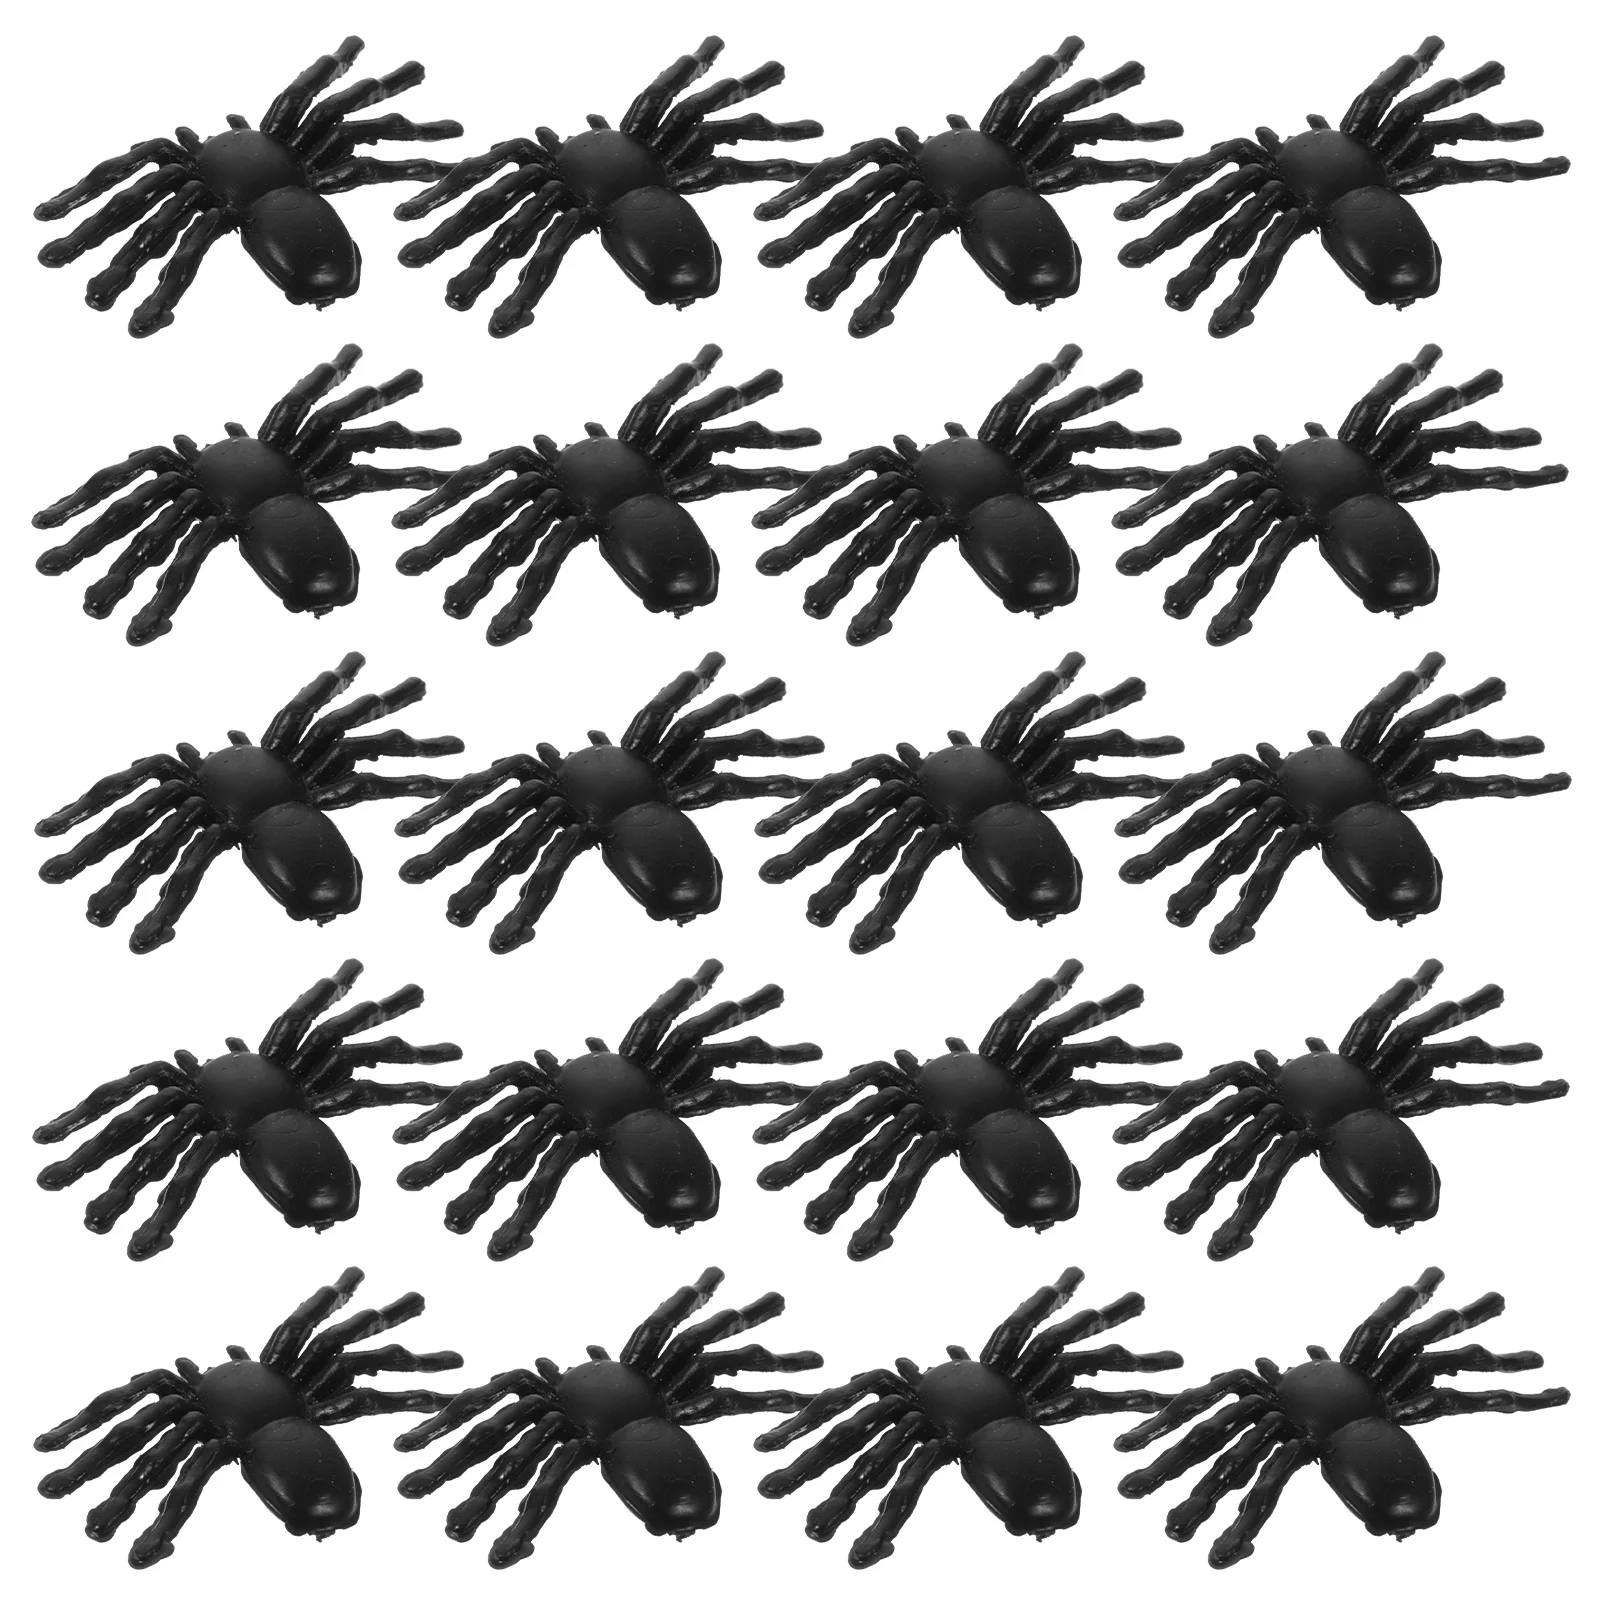 

50 Pcs Halloween Plastic Spider Decorations Props Ornaments Party Realistic Spiders Fake Decors Toy